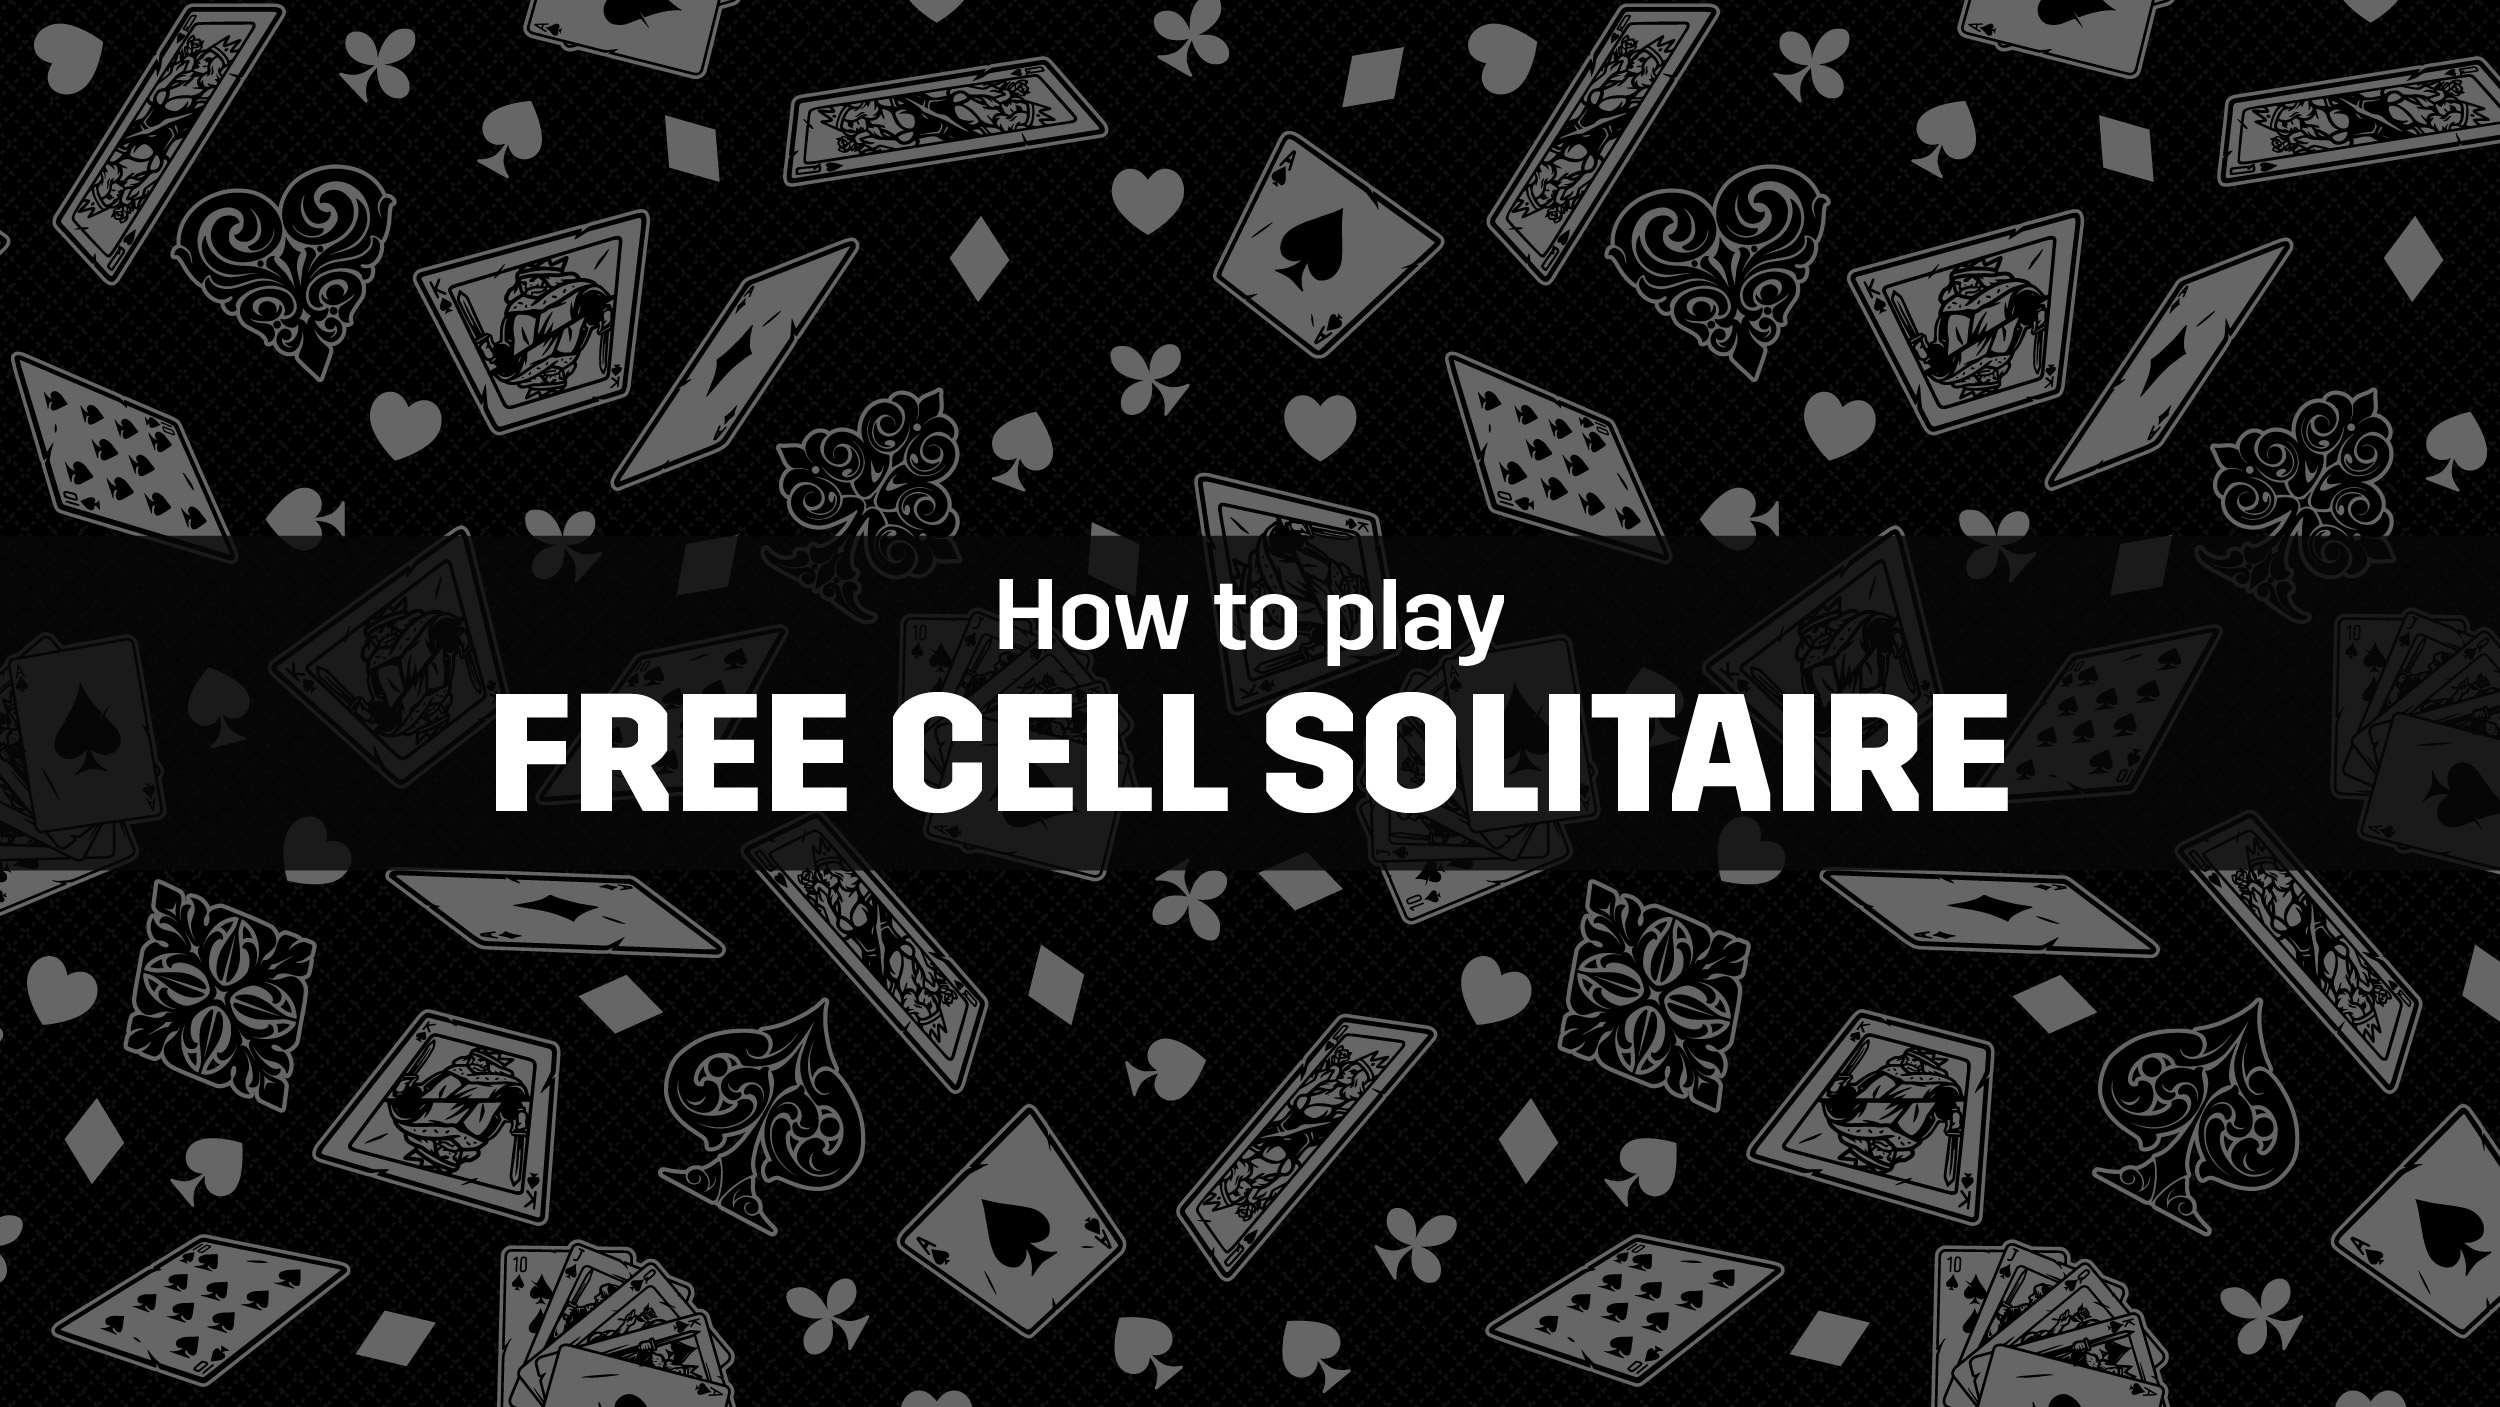 All About Free Cell Solitaire: Setup, How To Play, Rules, Tips